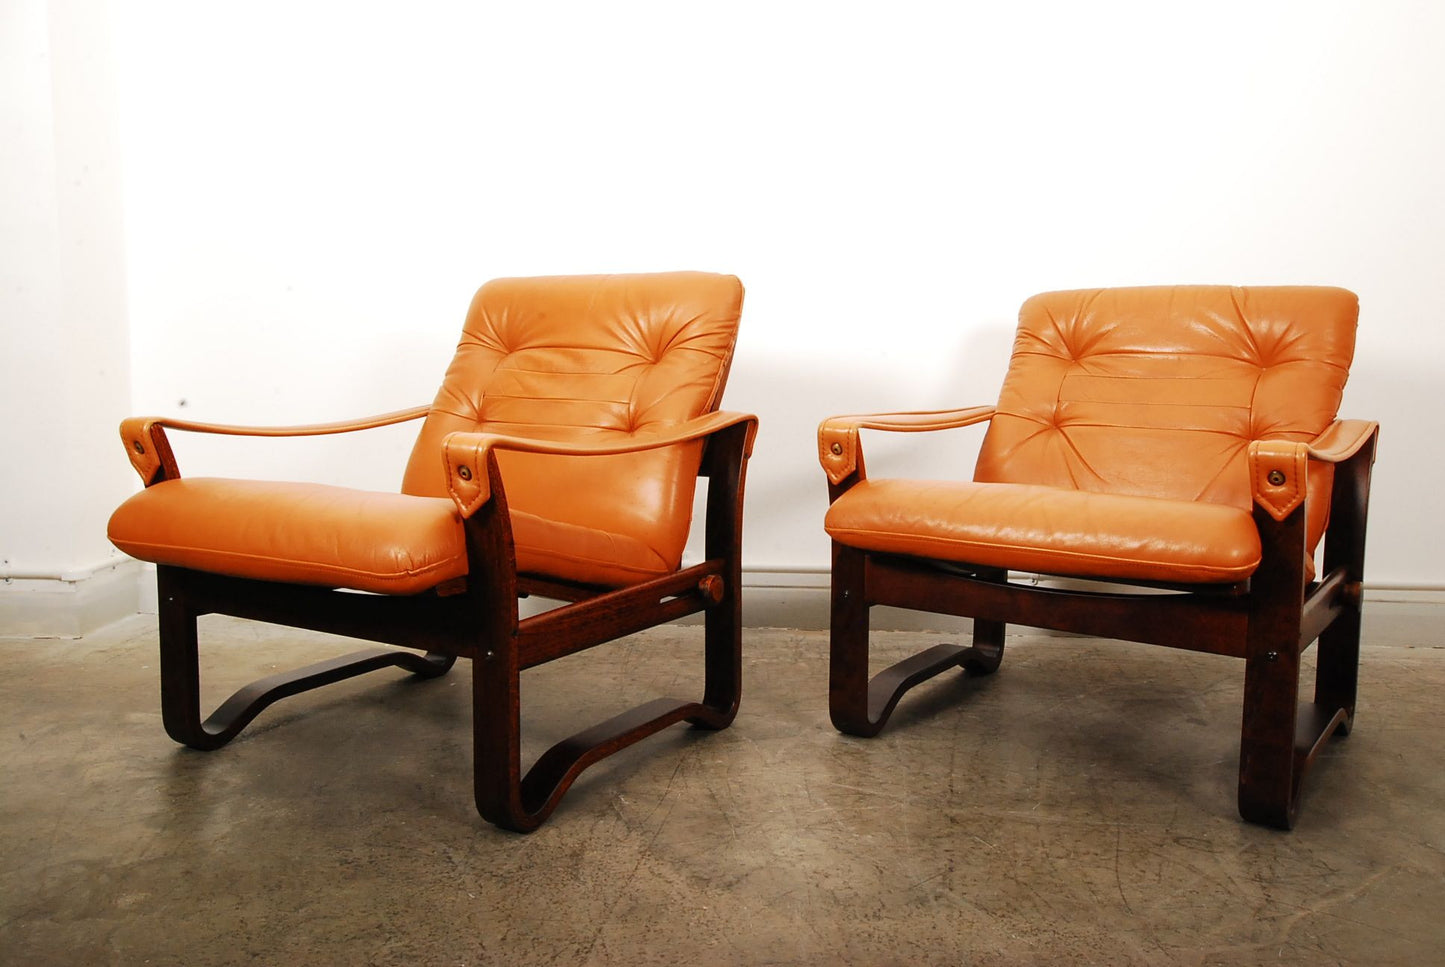 Pair of reclining loungers